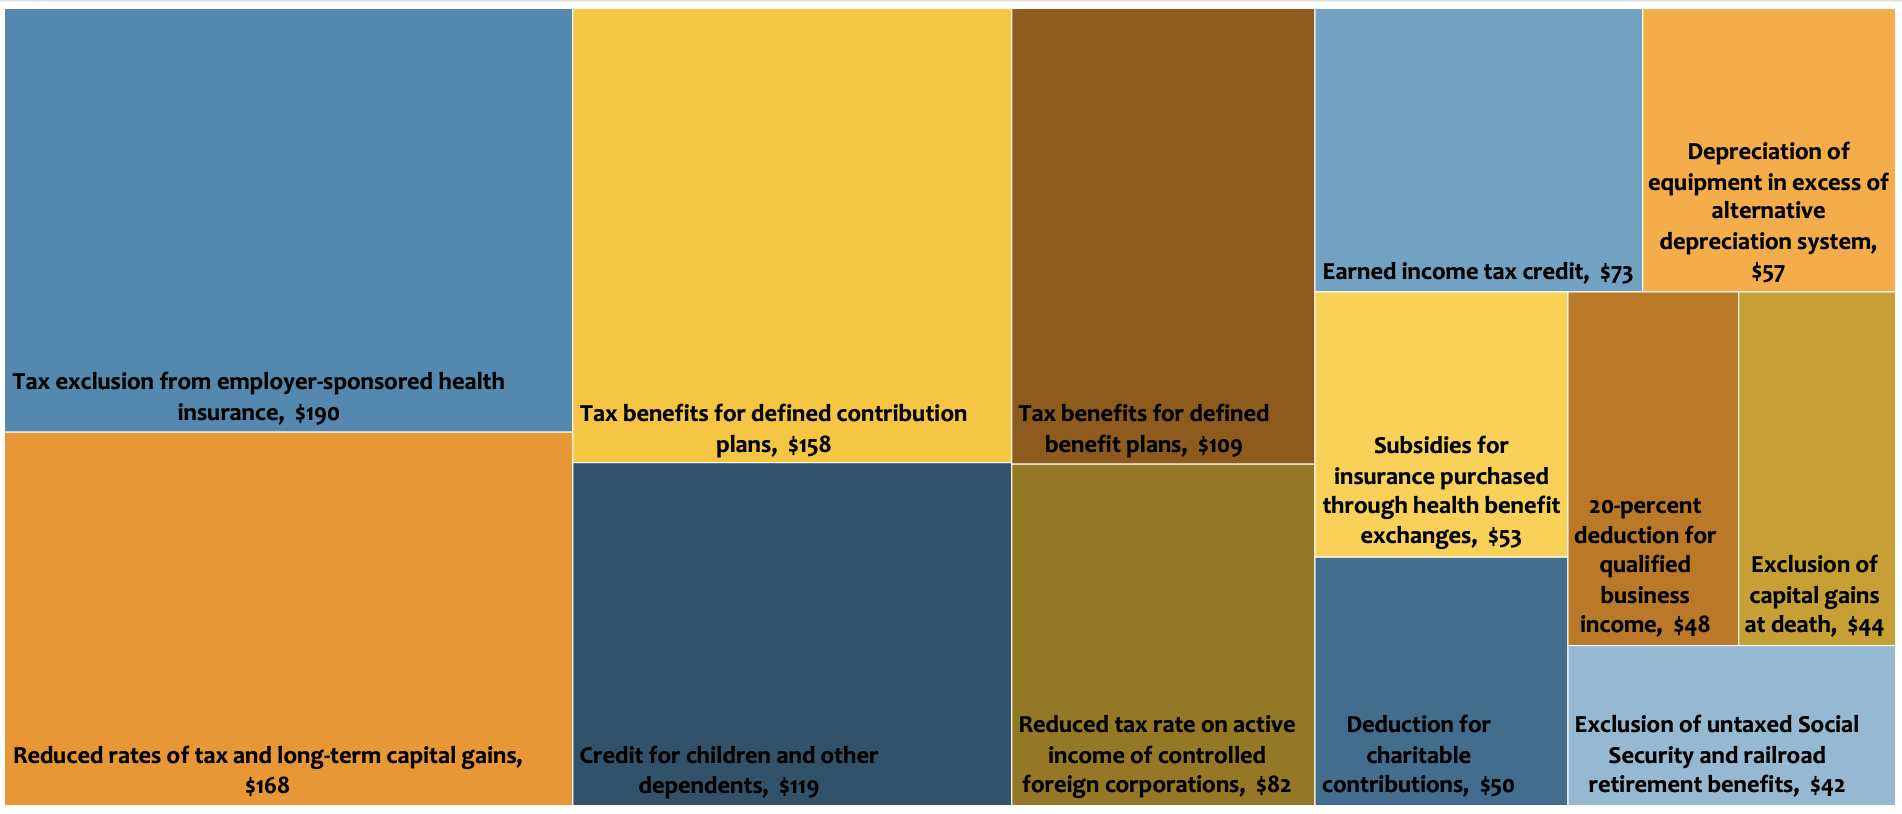 Illustration depicting the amount of federal expenditures from tax exclusions, exemptions, and deductions.